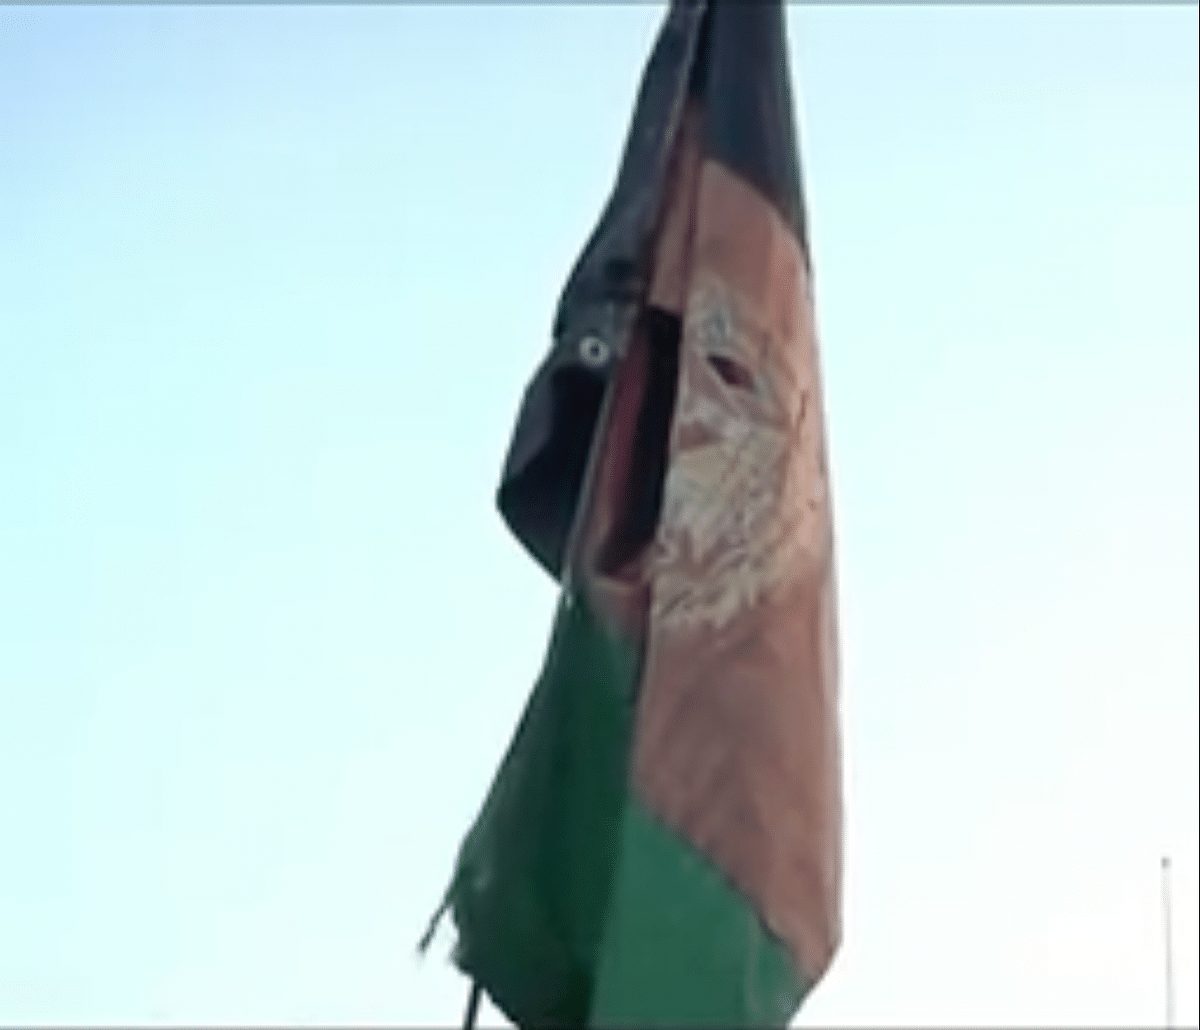 The video from 2011 shows US military personnel in Kandahar, Afghanistan.